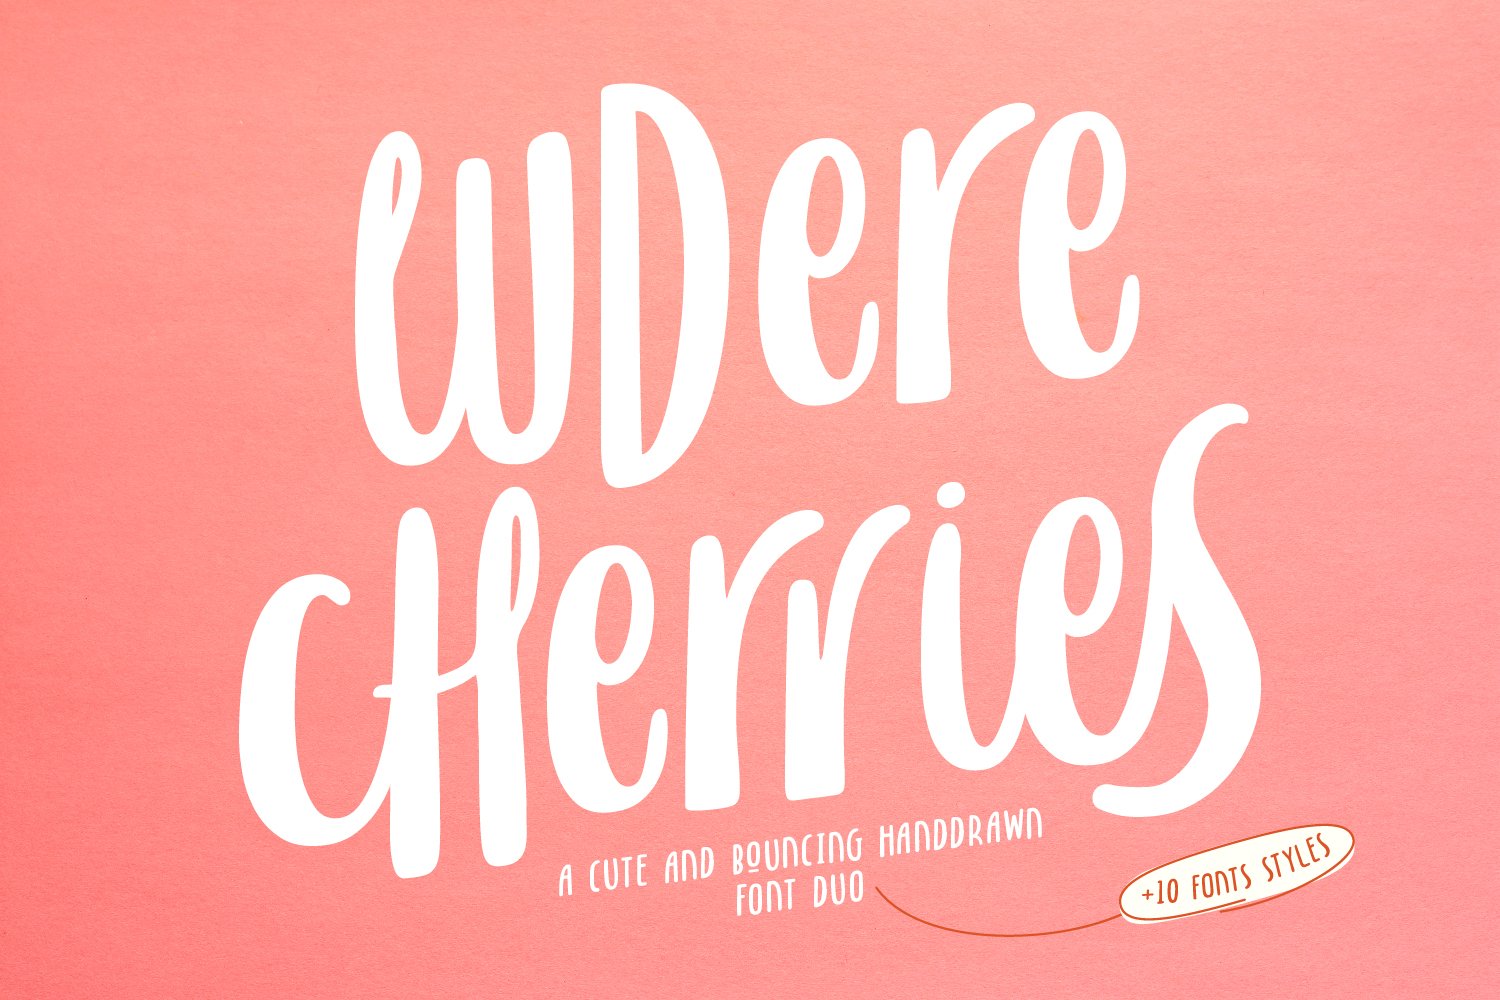 Cherries - 12 Fonts Styles cover image.